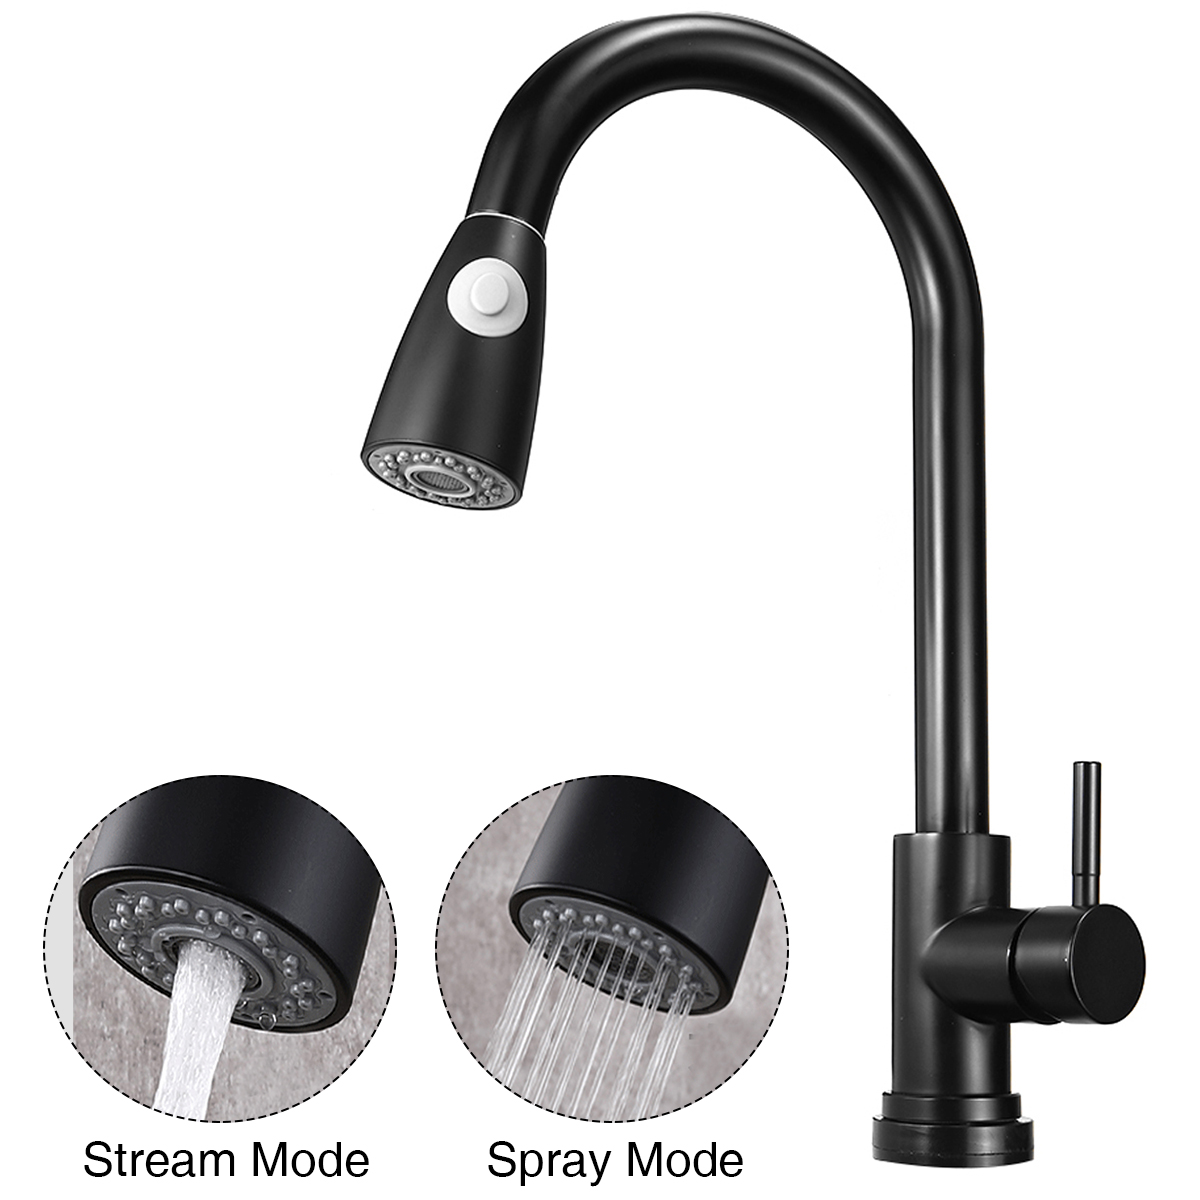 Kitchen Faucet Pull Down Kitchen Faucets Stainless Steel Kitchen Faucet with Pull Down Sprayer Modern Single Handle Kitchen Bar Faucet Mixer Tap - image 1 of 10